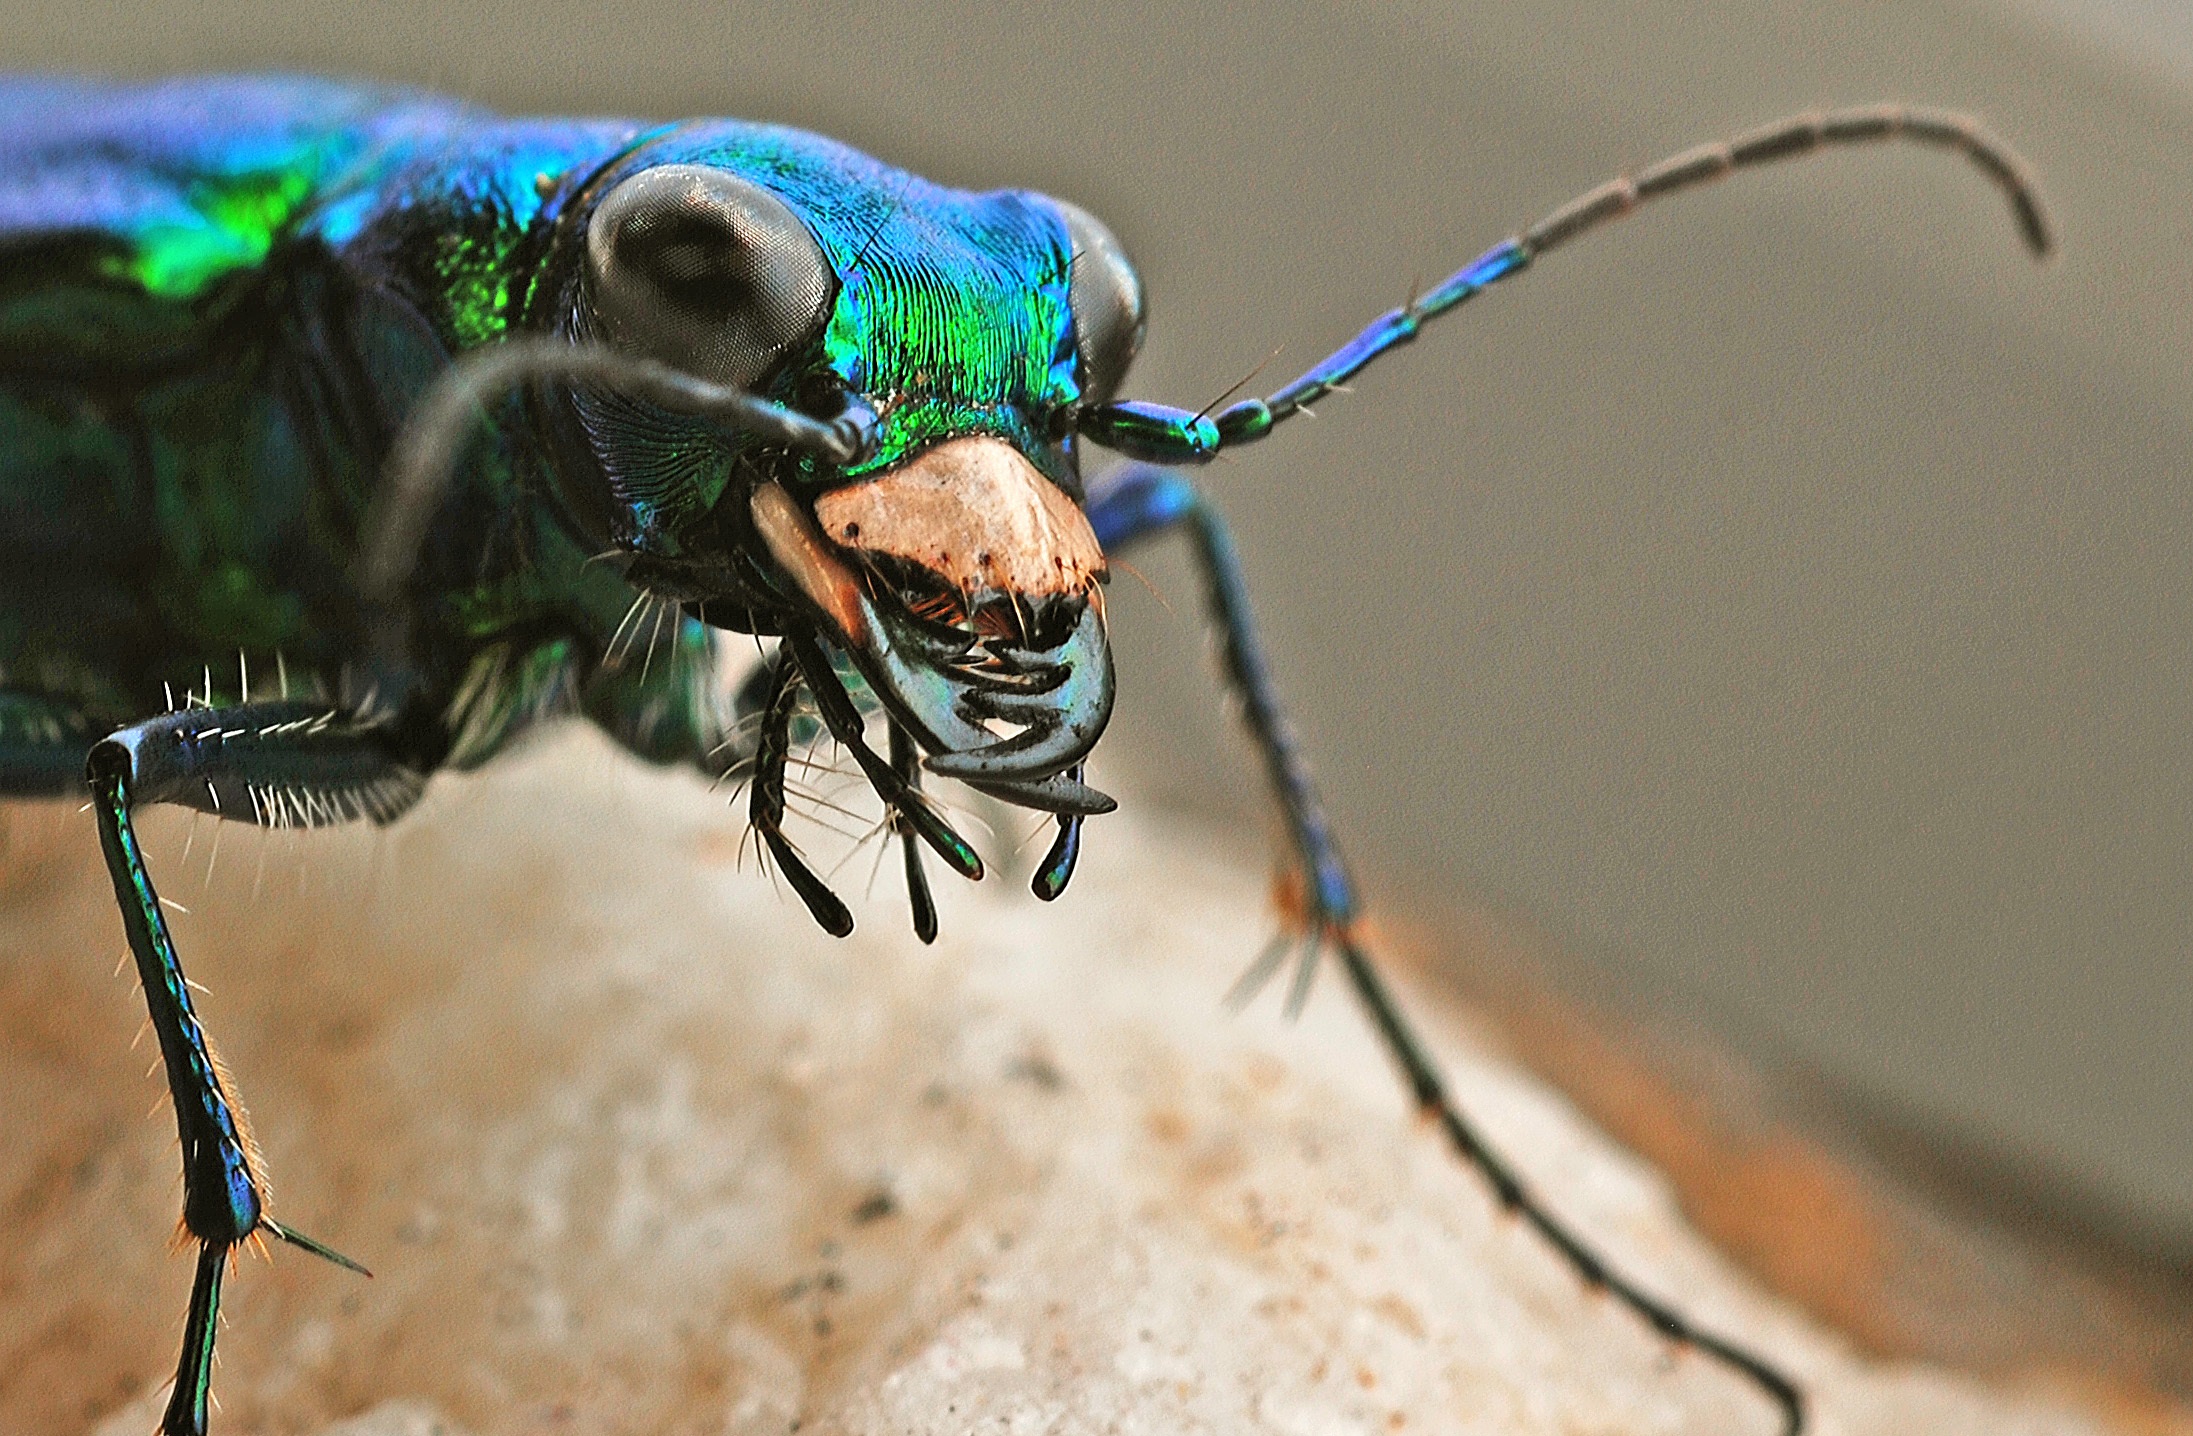 Tiger Beetles: The Quick and The Dead – Bugs In Our Backyard